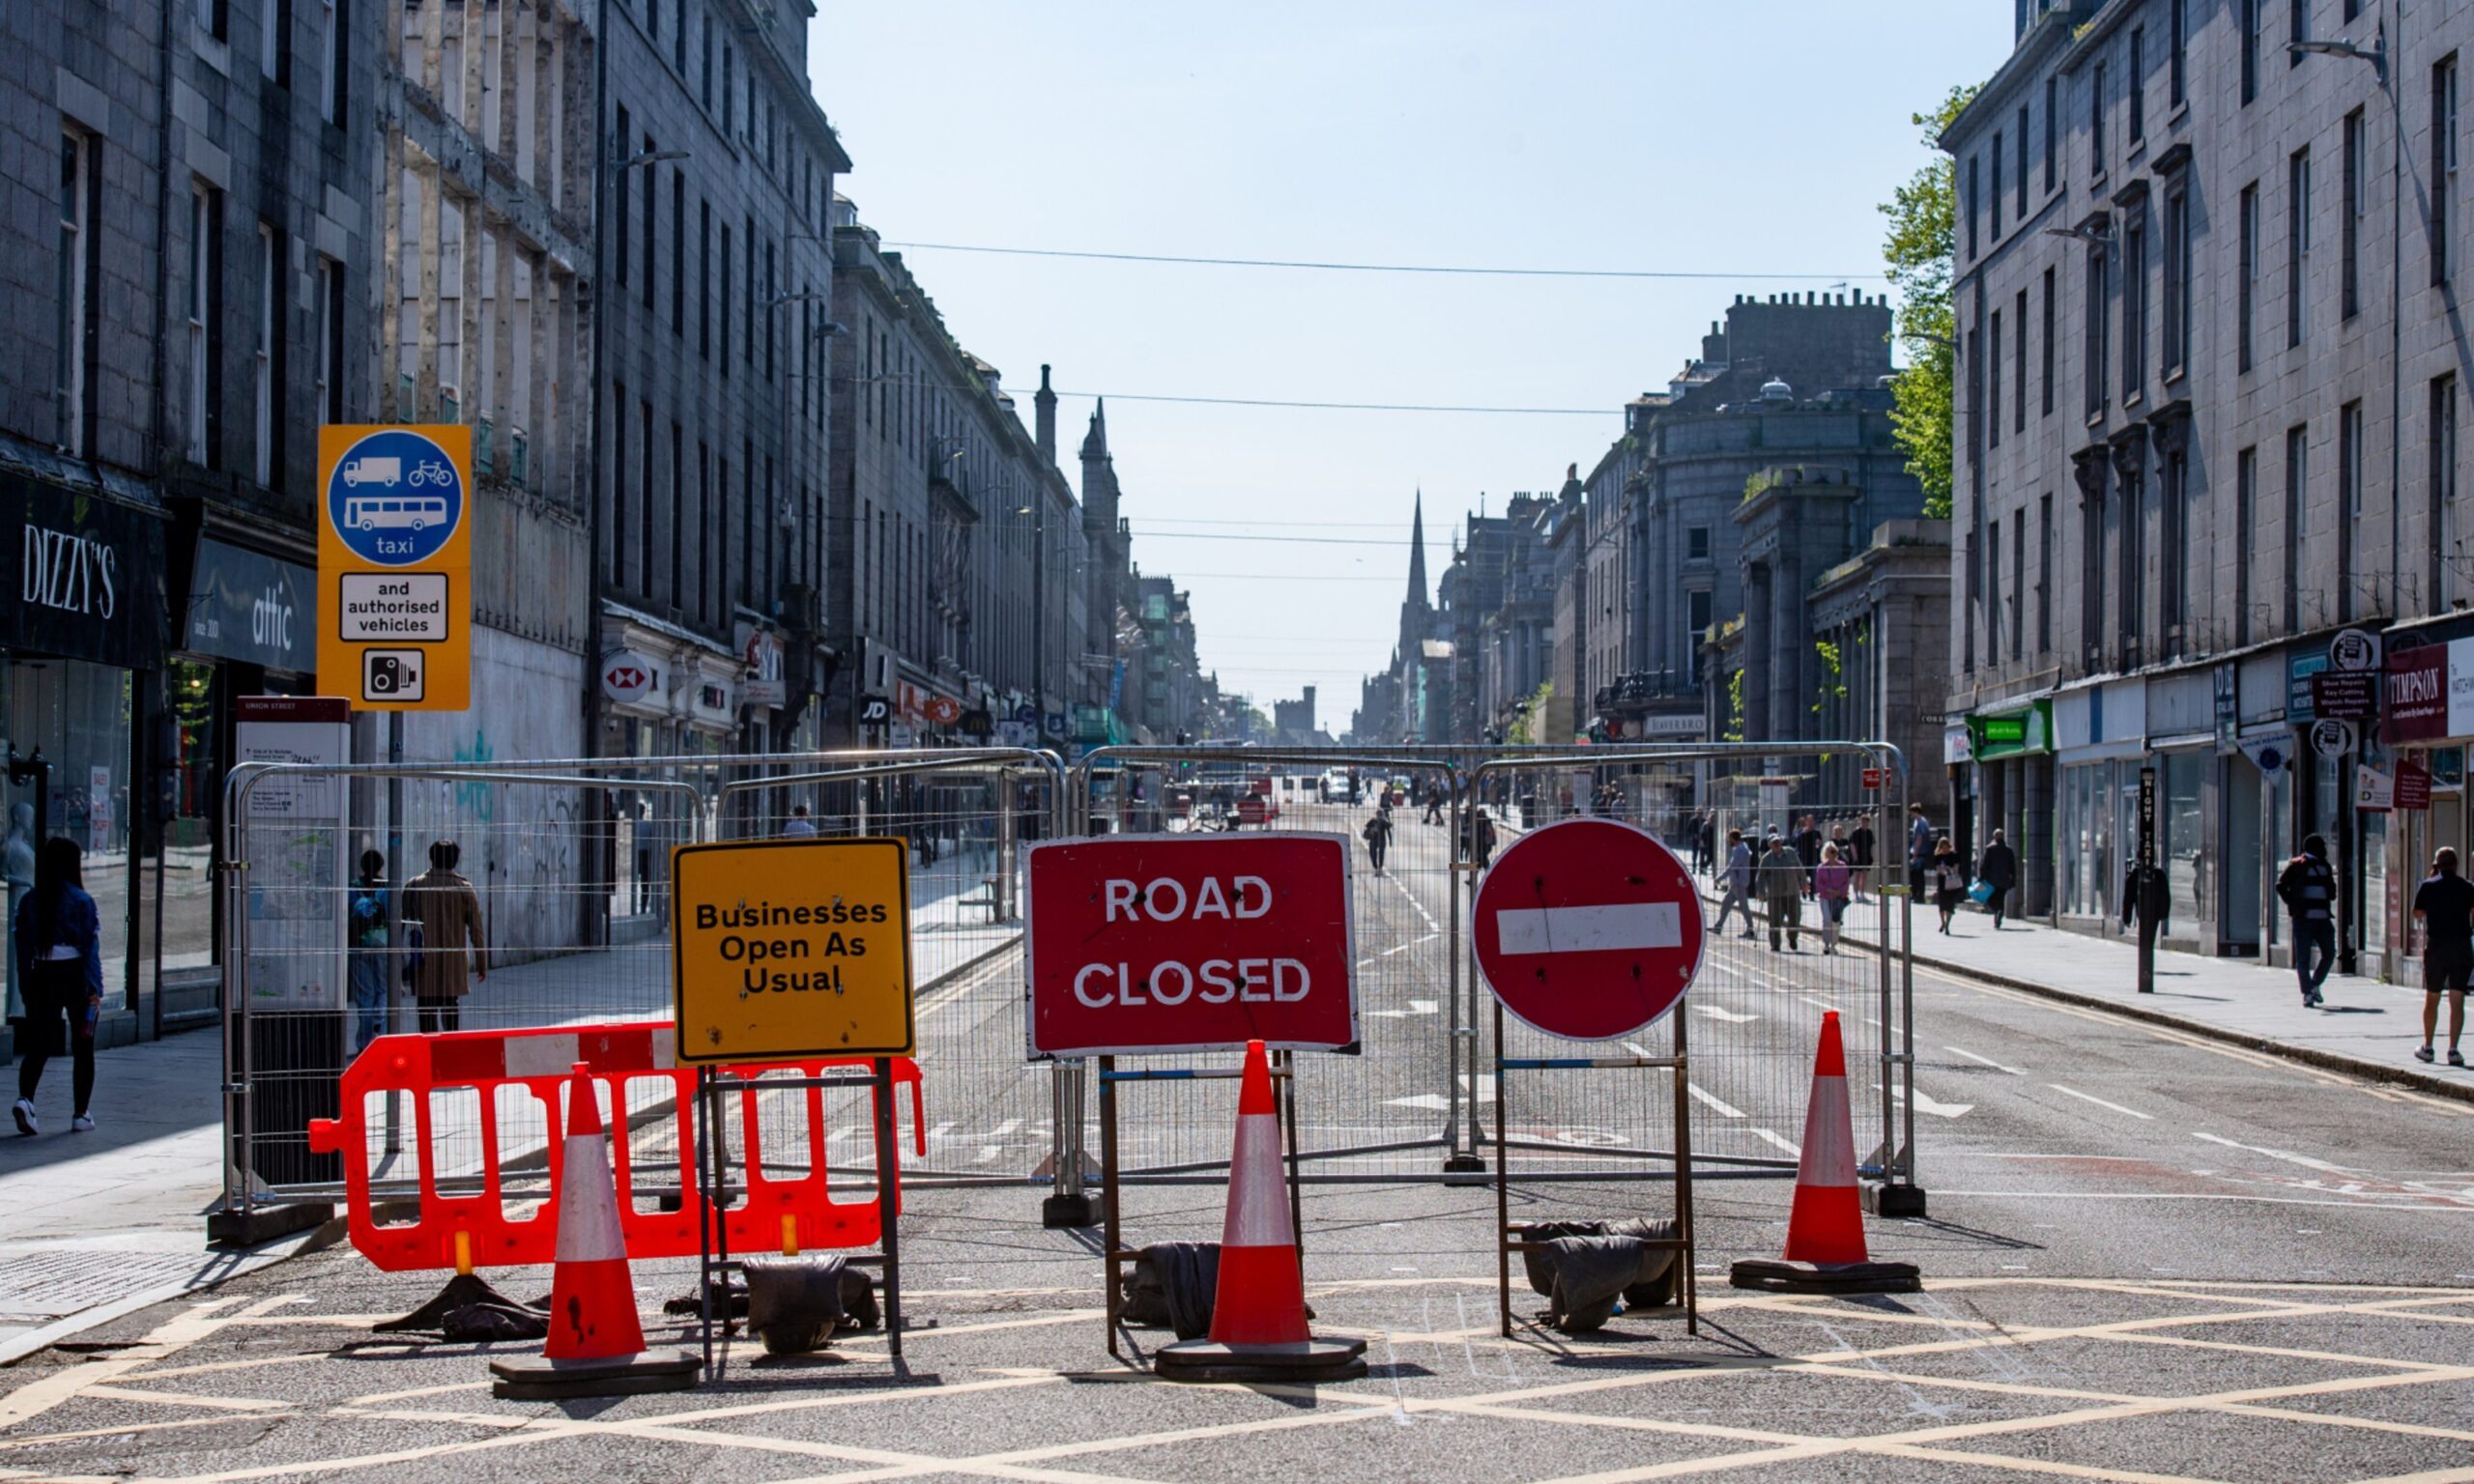 Road closed sign on Union Street amid works.